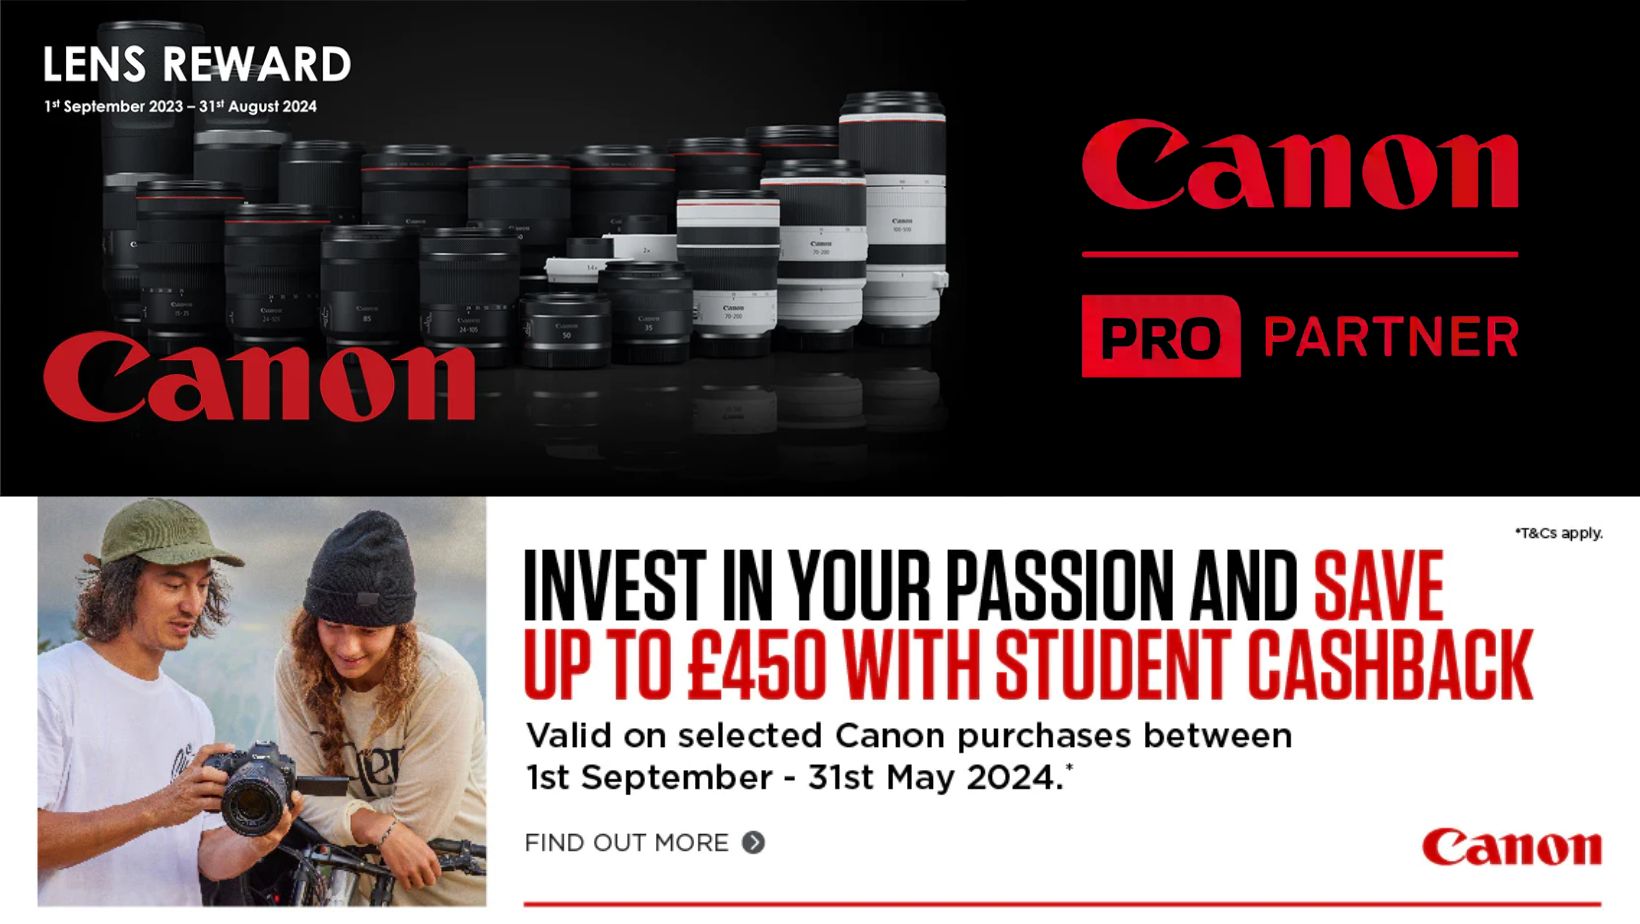 Promotional Graphic for the 2 Canon Offers - Lens Reward & Student Cashback